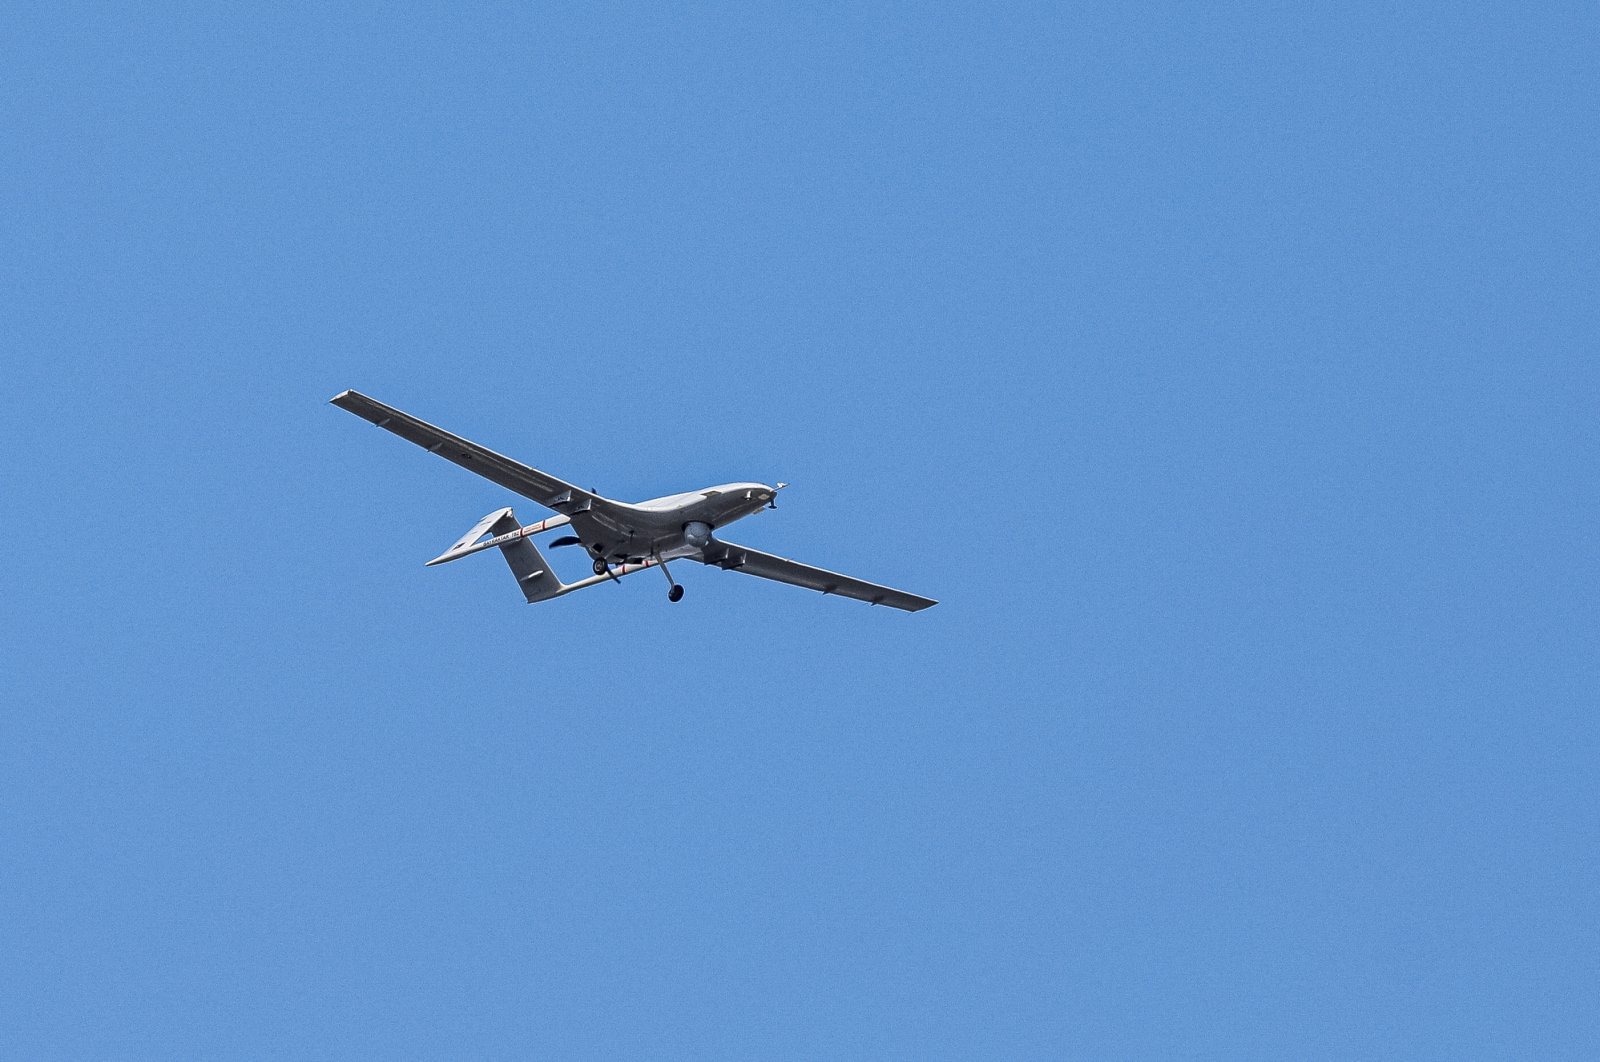 A Bayraktar TB2 unmanned combat aerial vehicle is seen during a demonstration flight at the aerospace and technology festival, Teknofest, in Baku, Azerbaijan, May 27, 2022. (Reuters Photo)